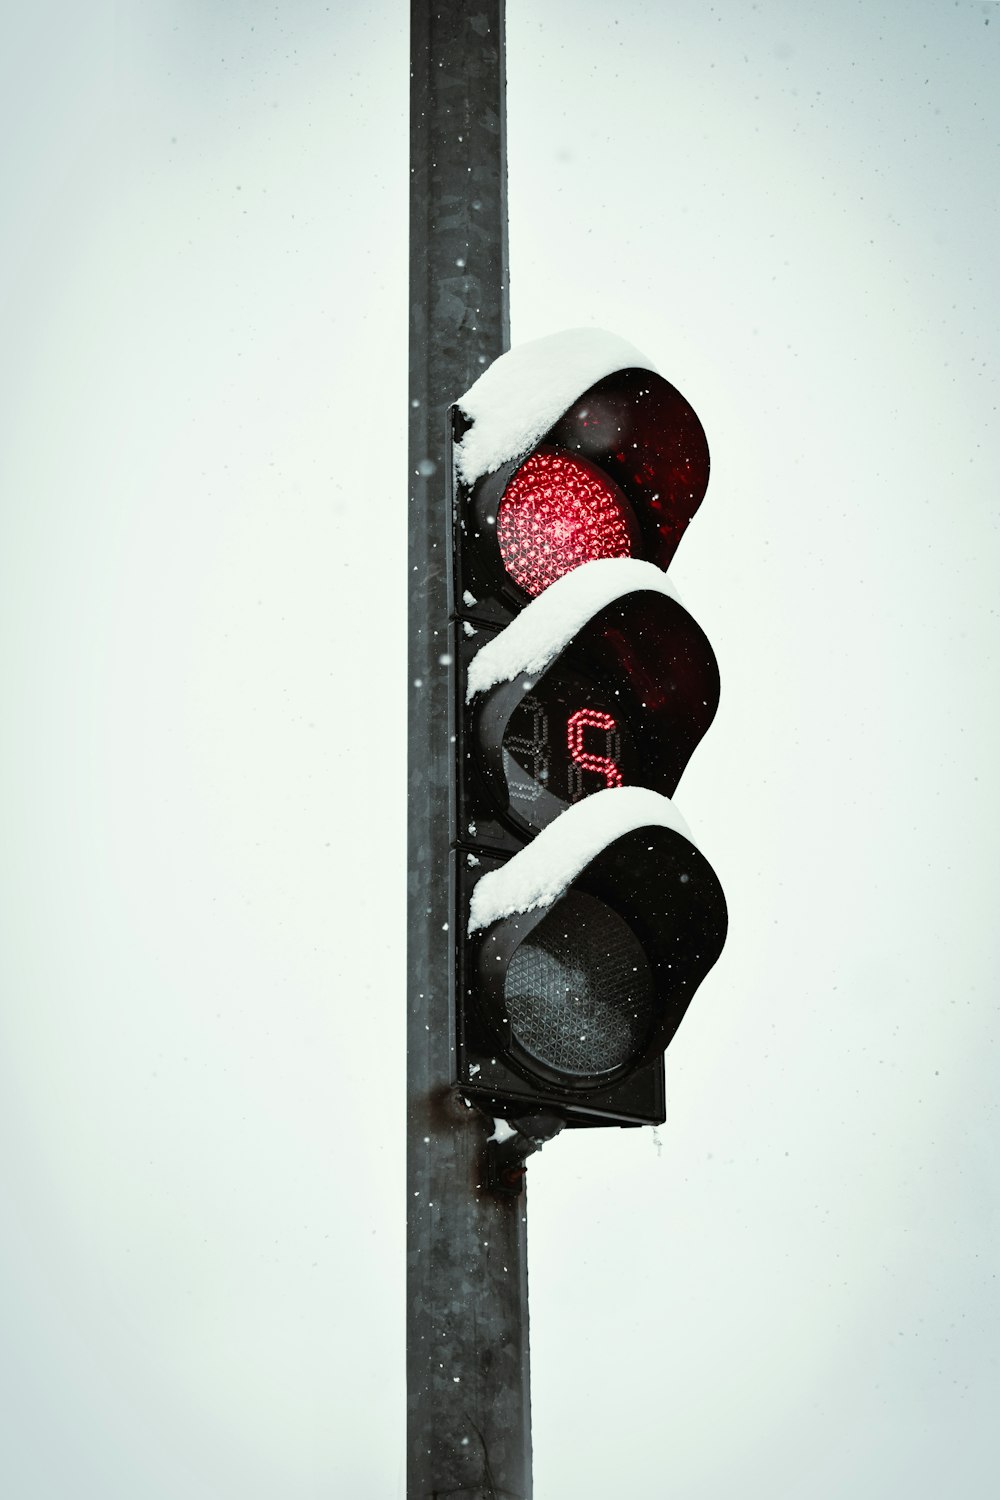 a traffic light with a red light in the snow